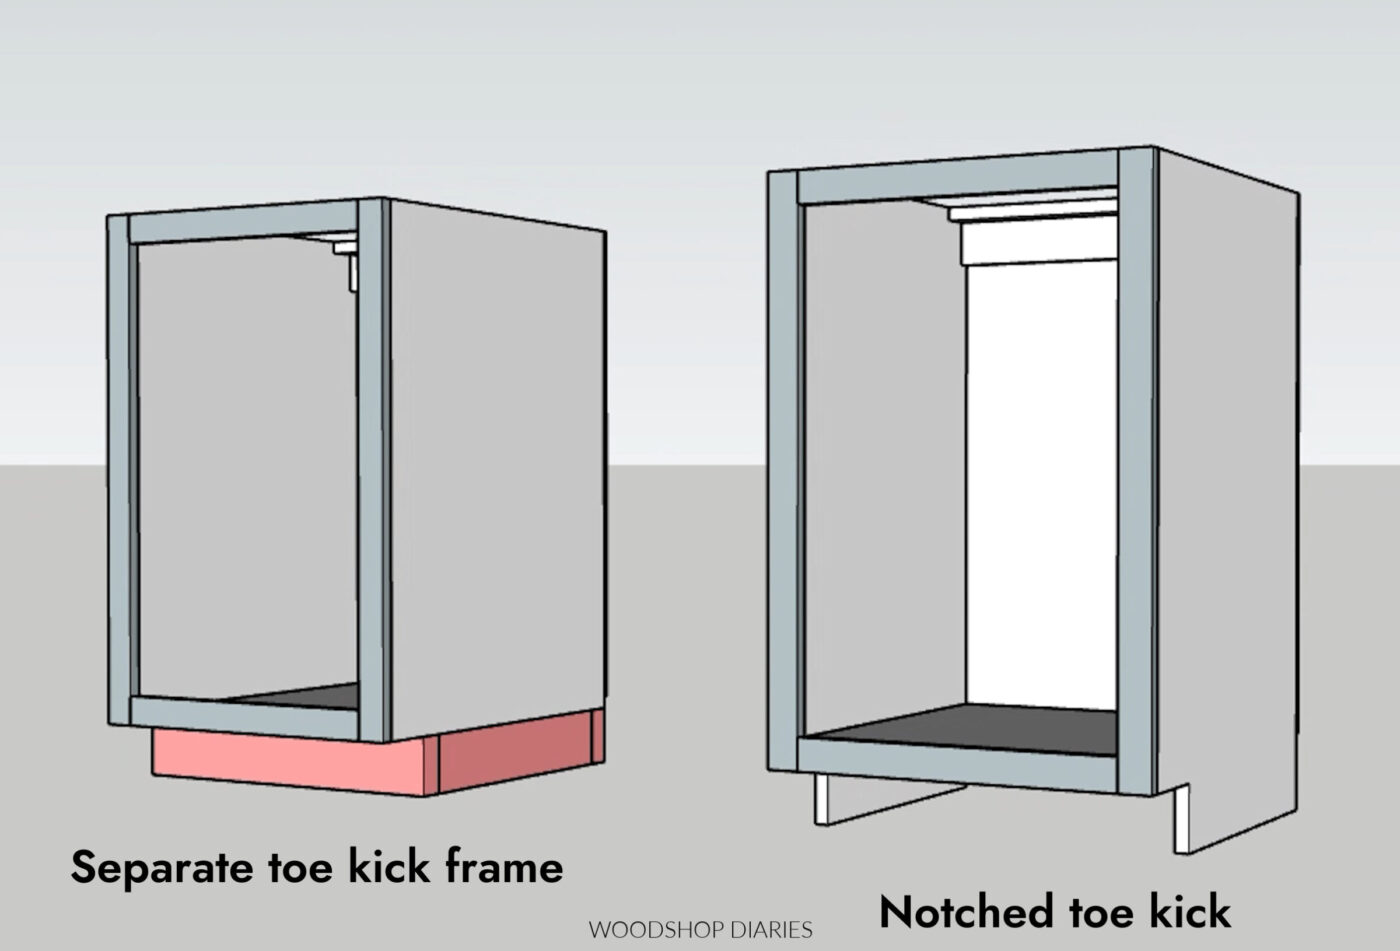 diagram of two cabinet boxes--one with a separate toe kick frame and one with a notched toe kick in the side panels